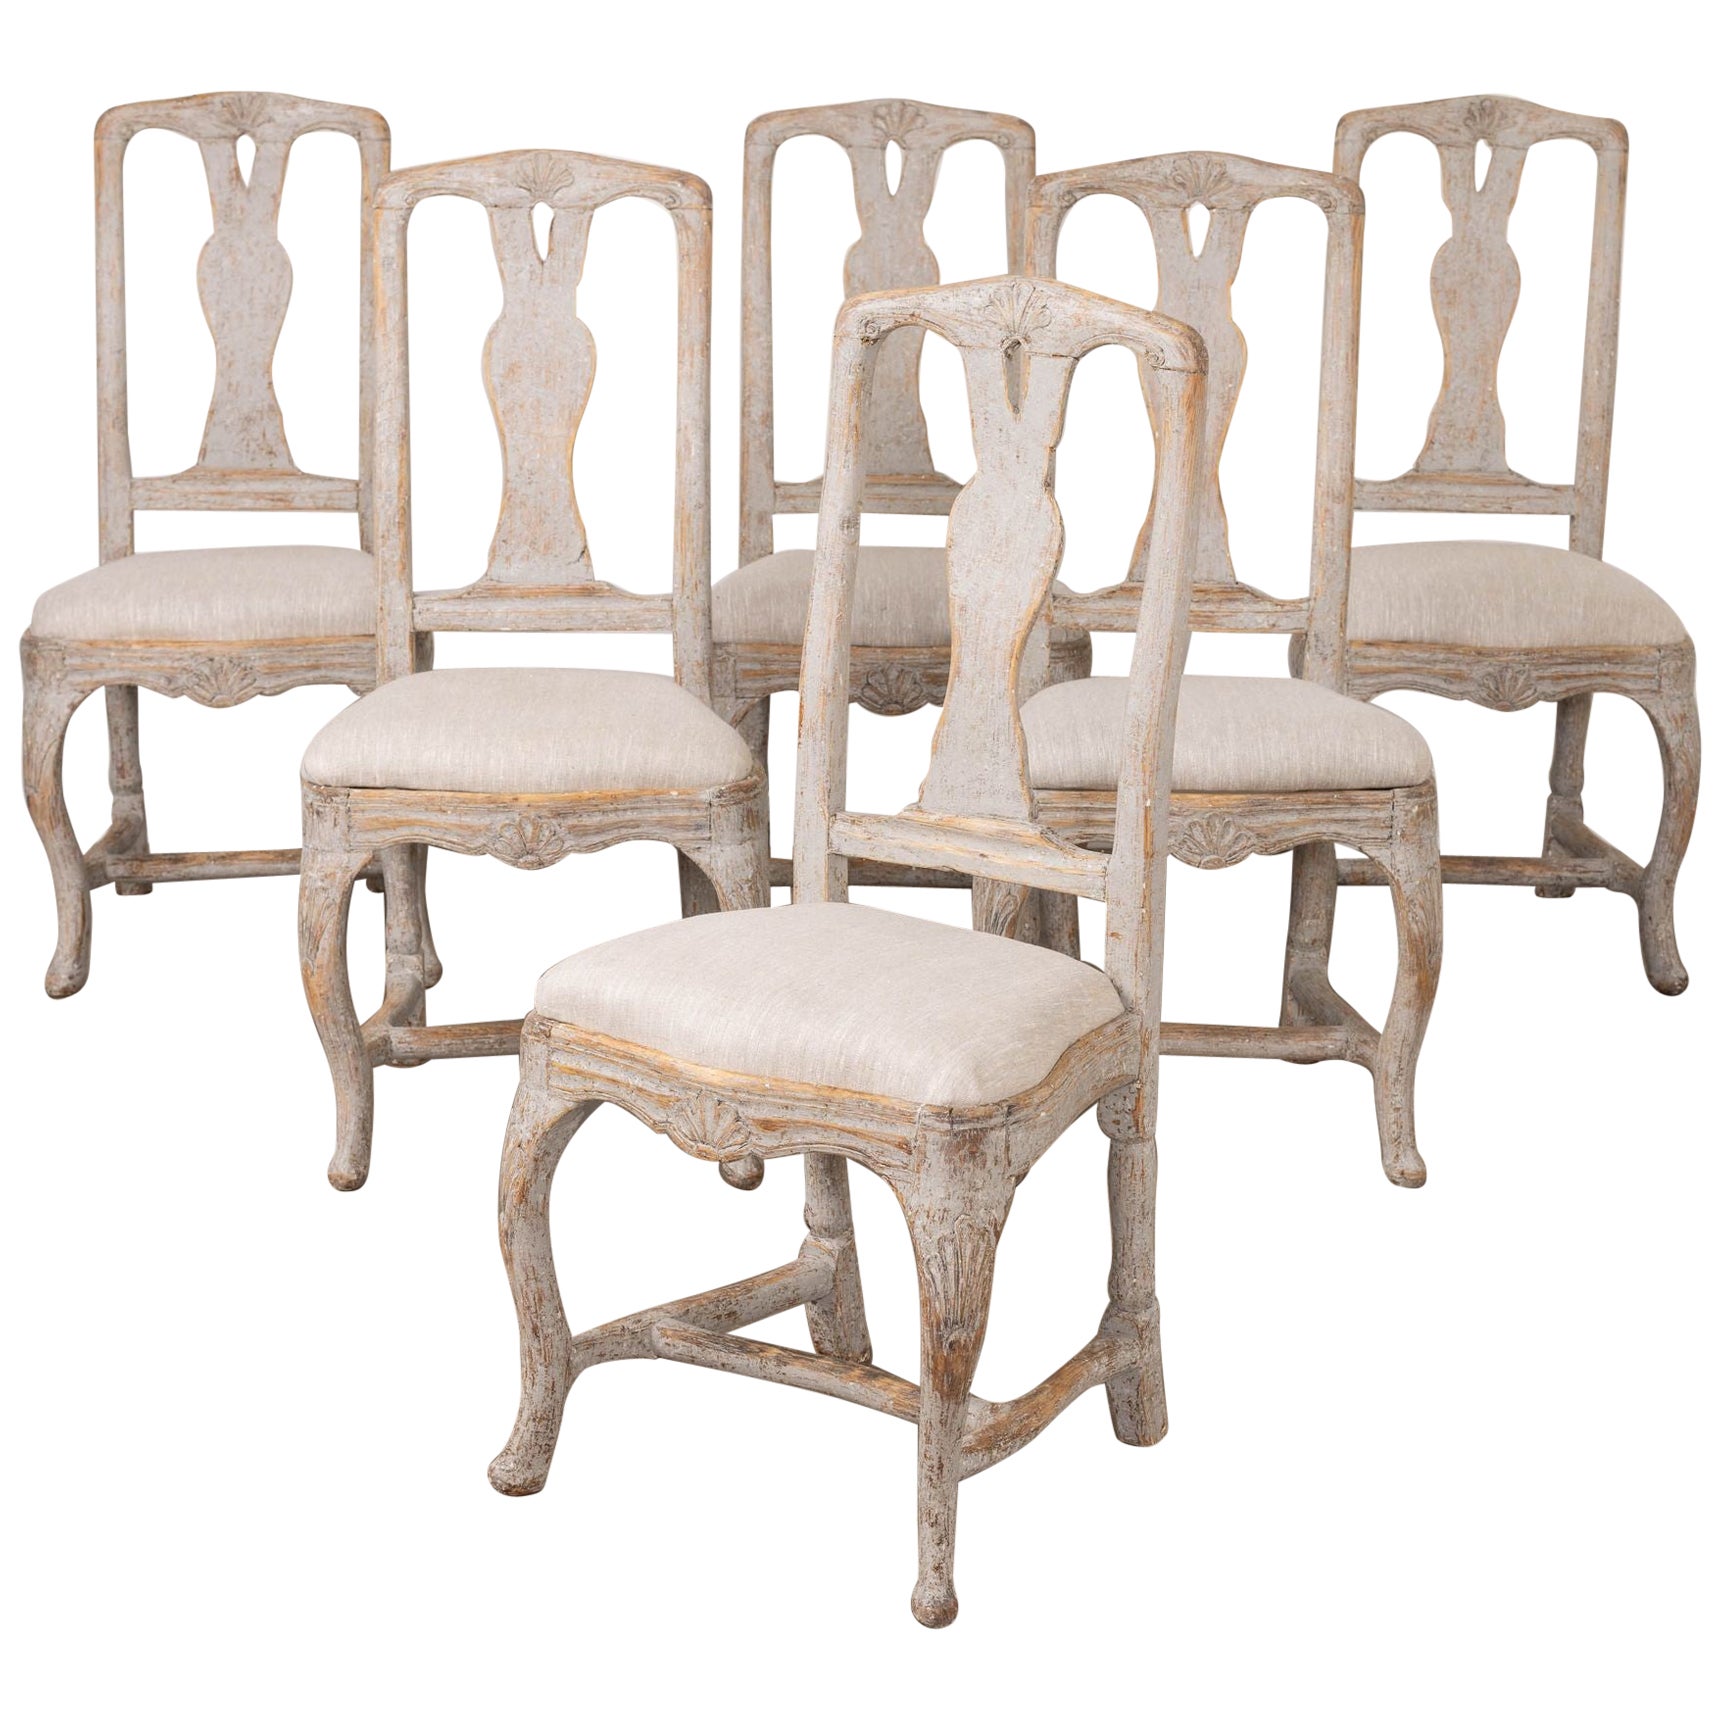 18th c. Swedish Rococo Period Painted Dining Chairs with Slip Seats For Sale